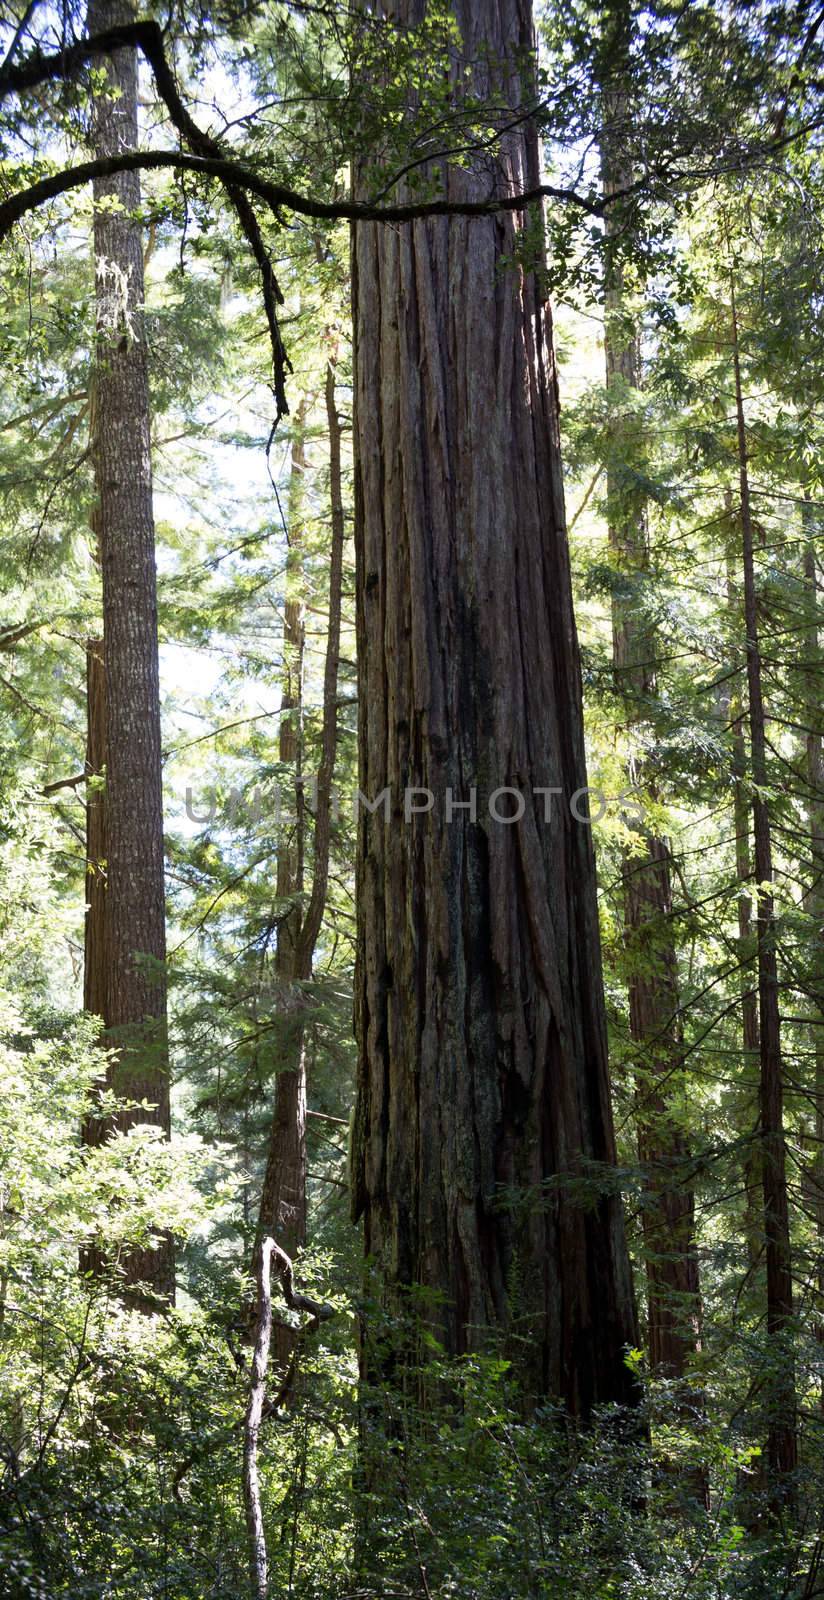 Towering Redwood Sequoia Pine at Big Basin Redwoods Park, California by wolterk